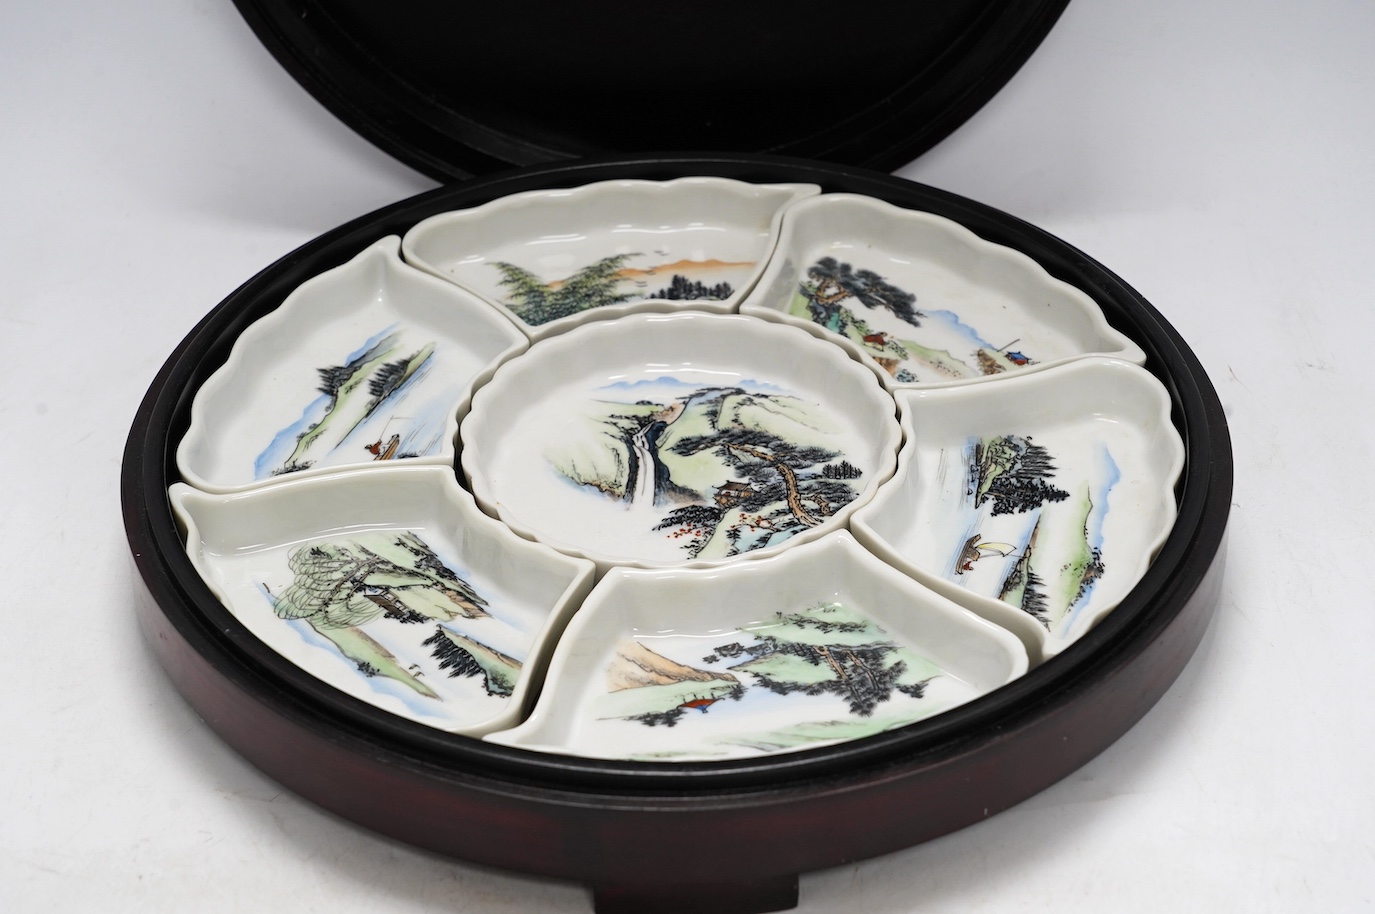 A circular wooden boxed Chinese decorated supper set, 32.5cm diameter. Condition - box marked, poor, supper set good